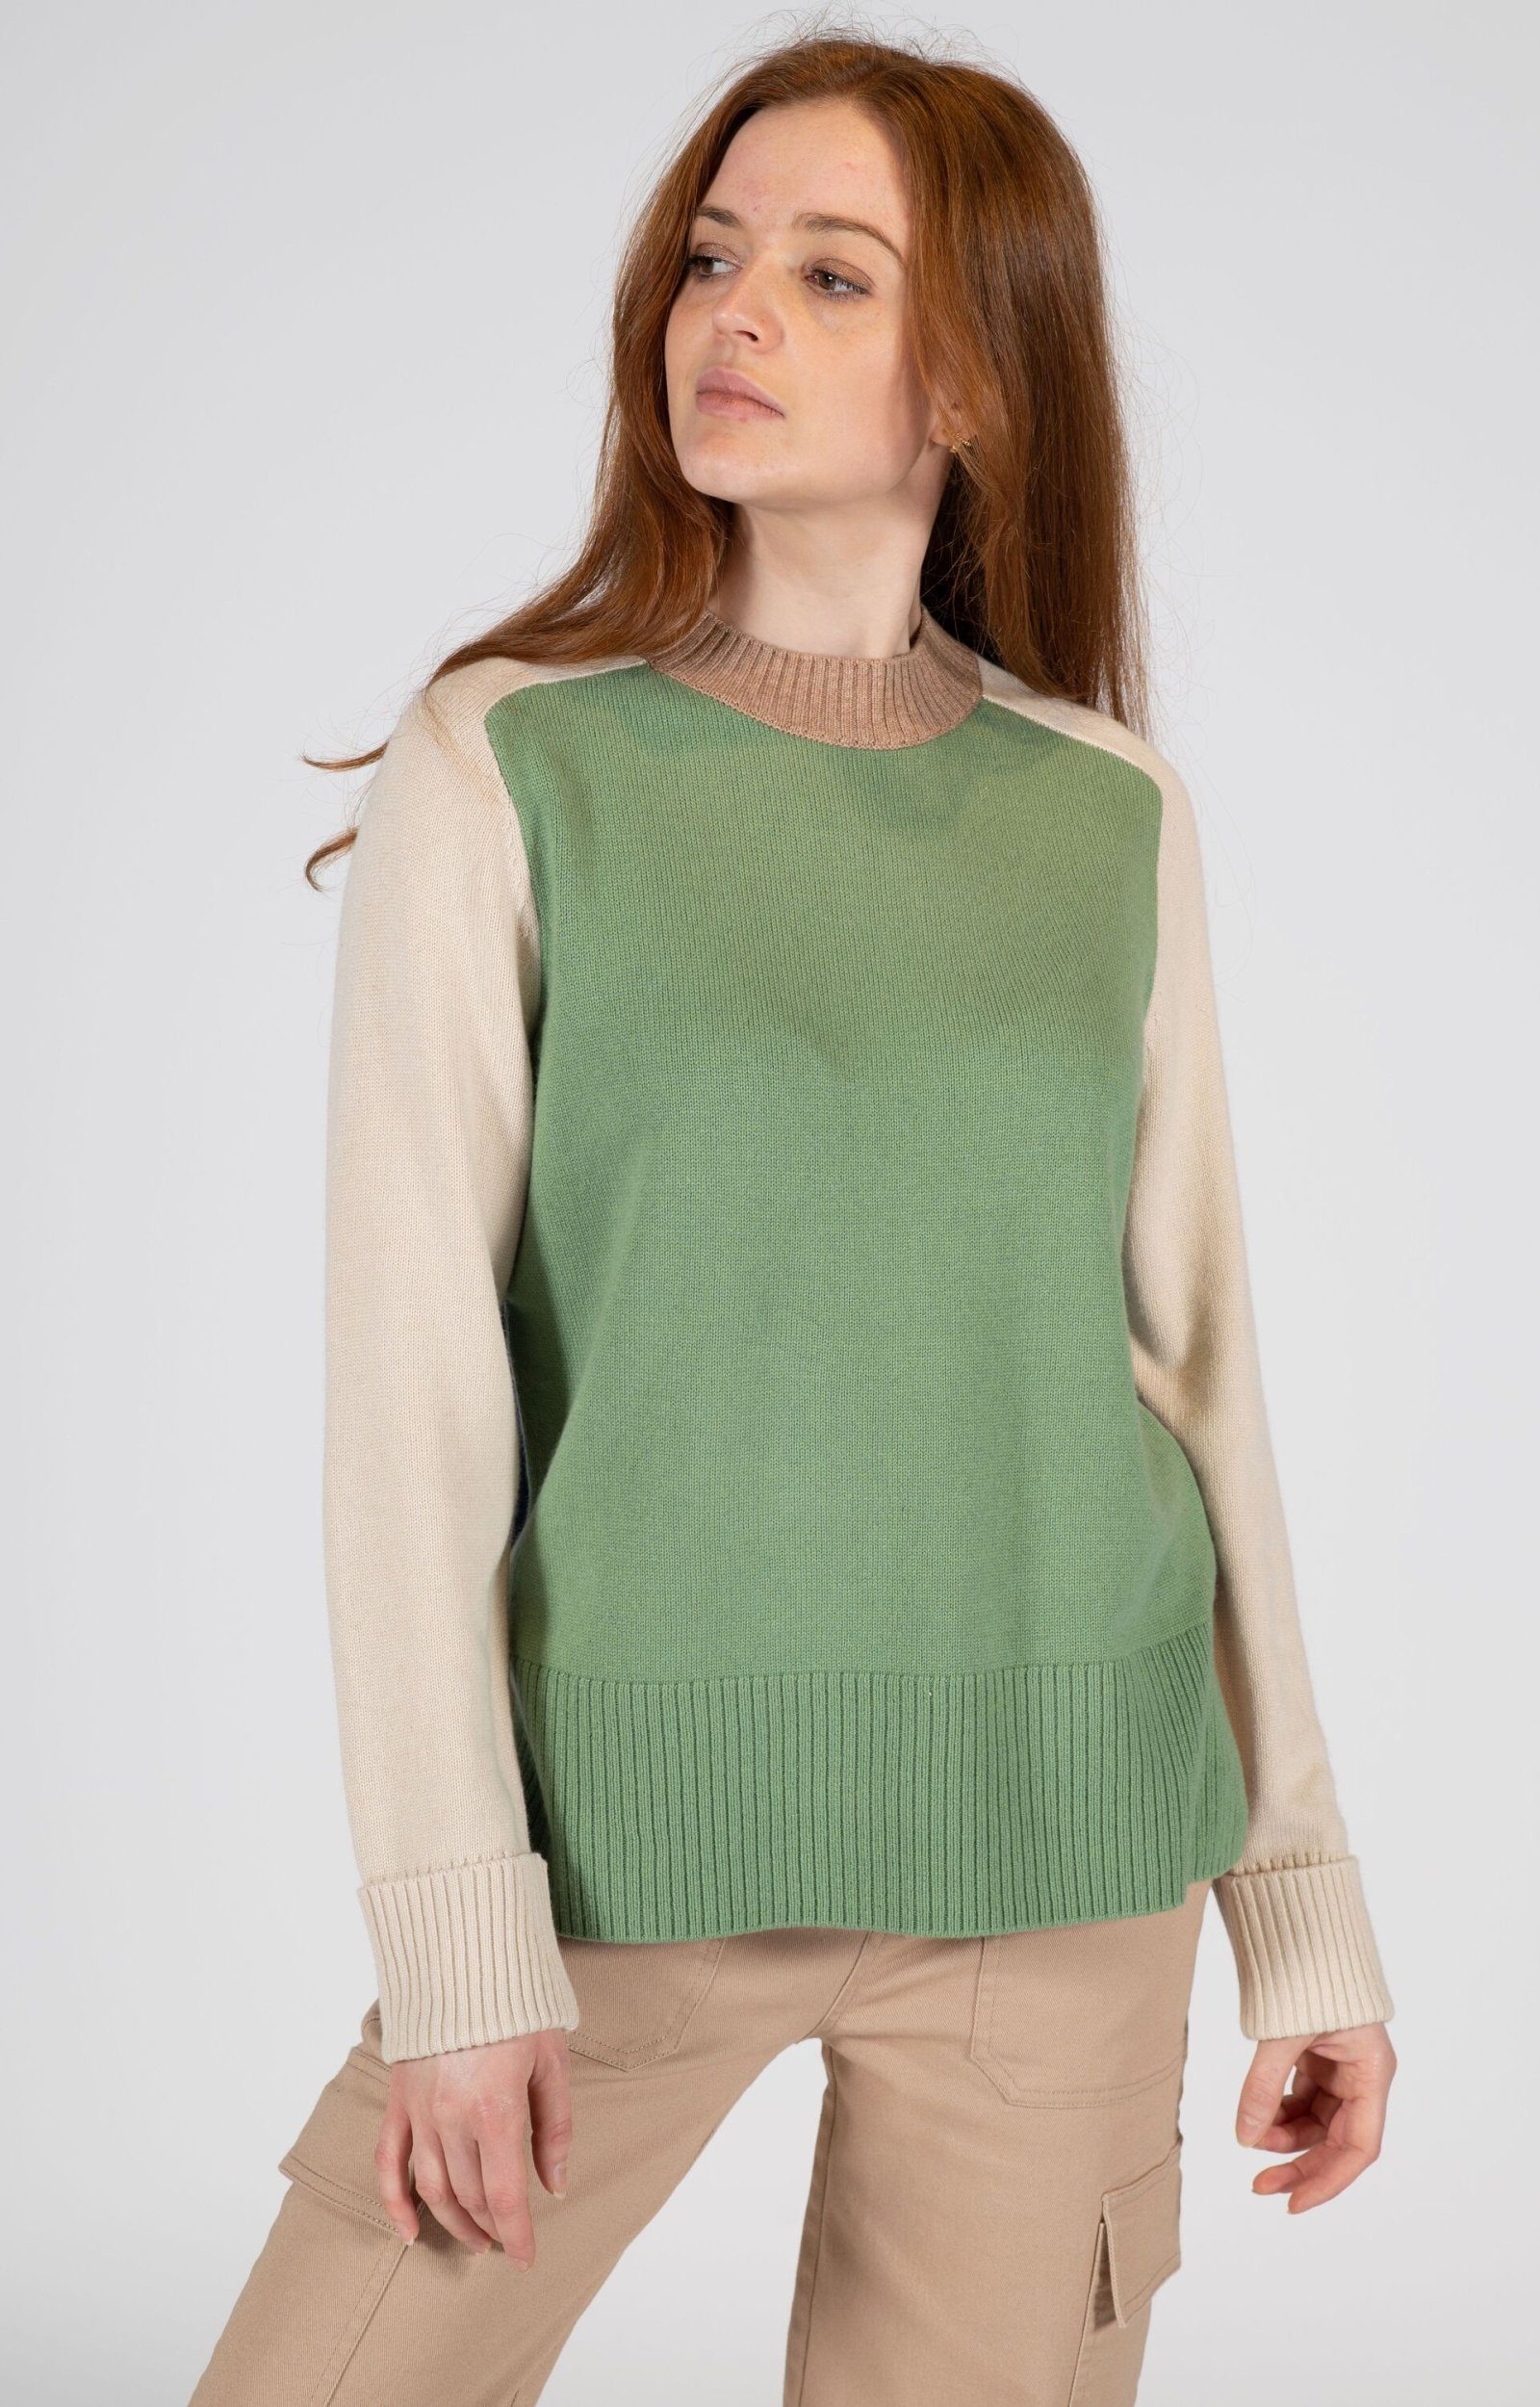 multicolor knitted, Sweater PEOPLE FASHION THE Rundhalspullover WASABI